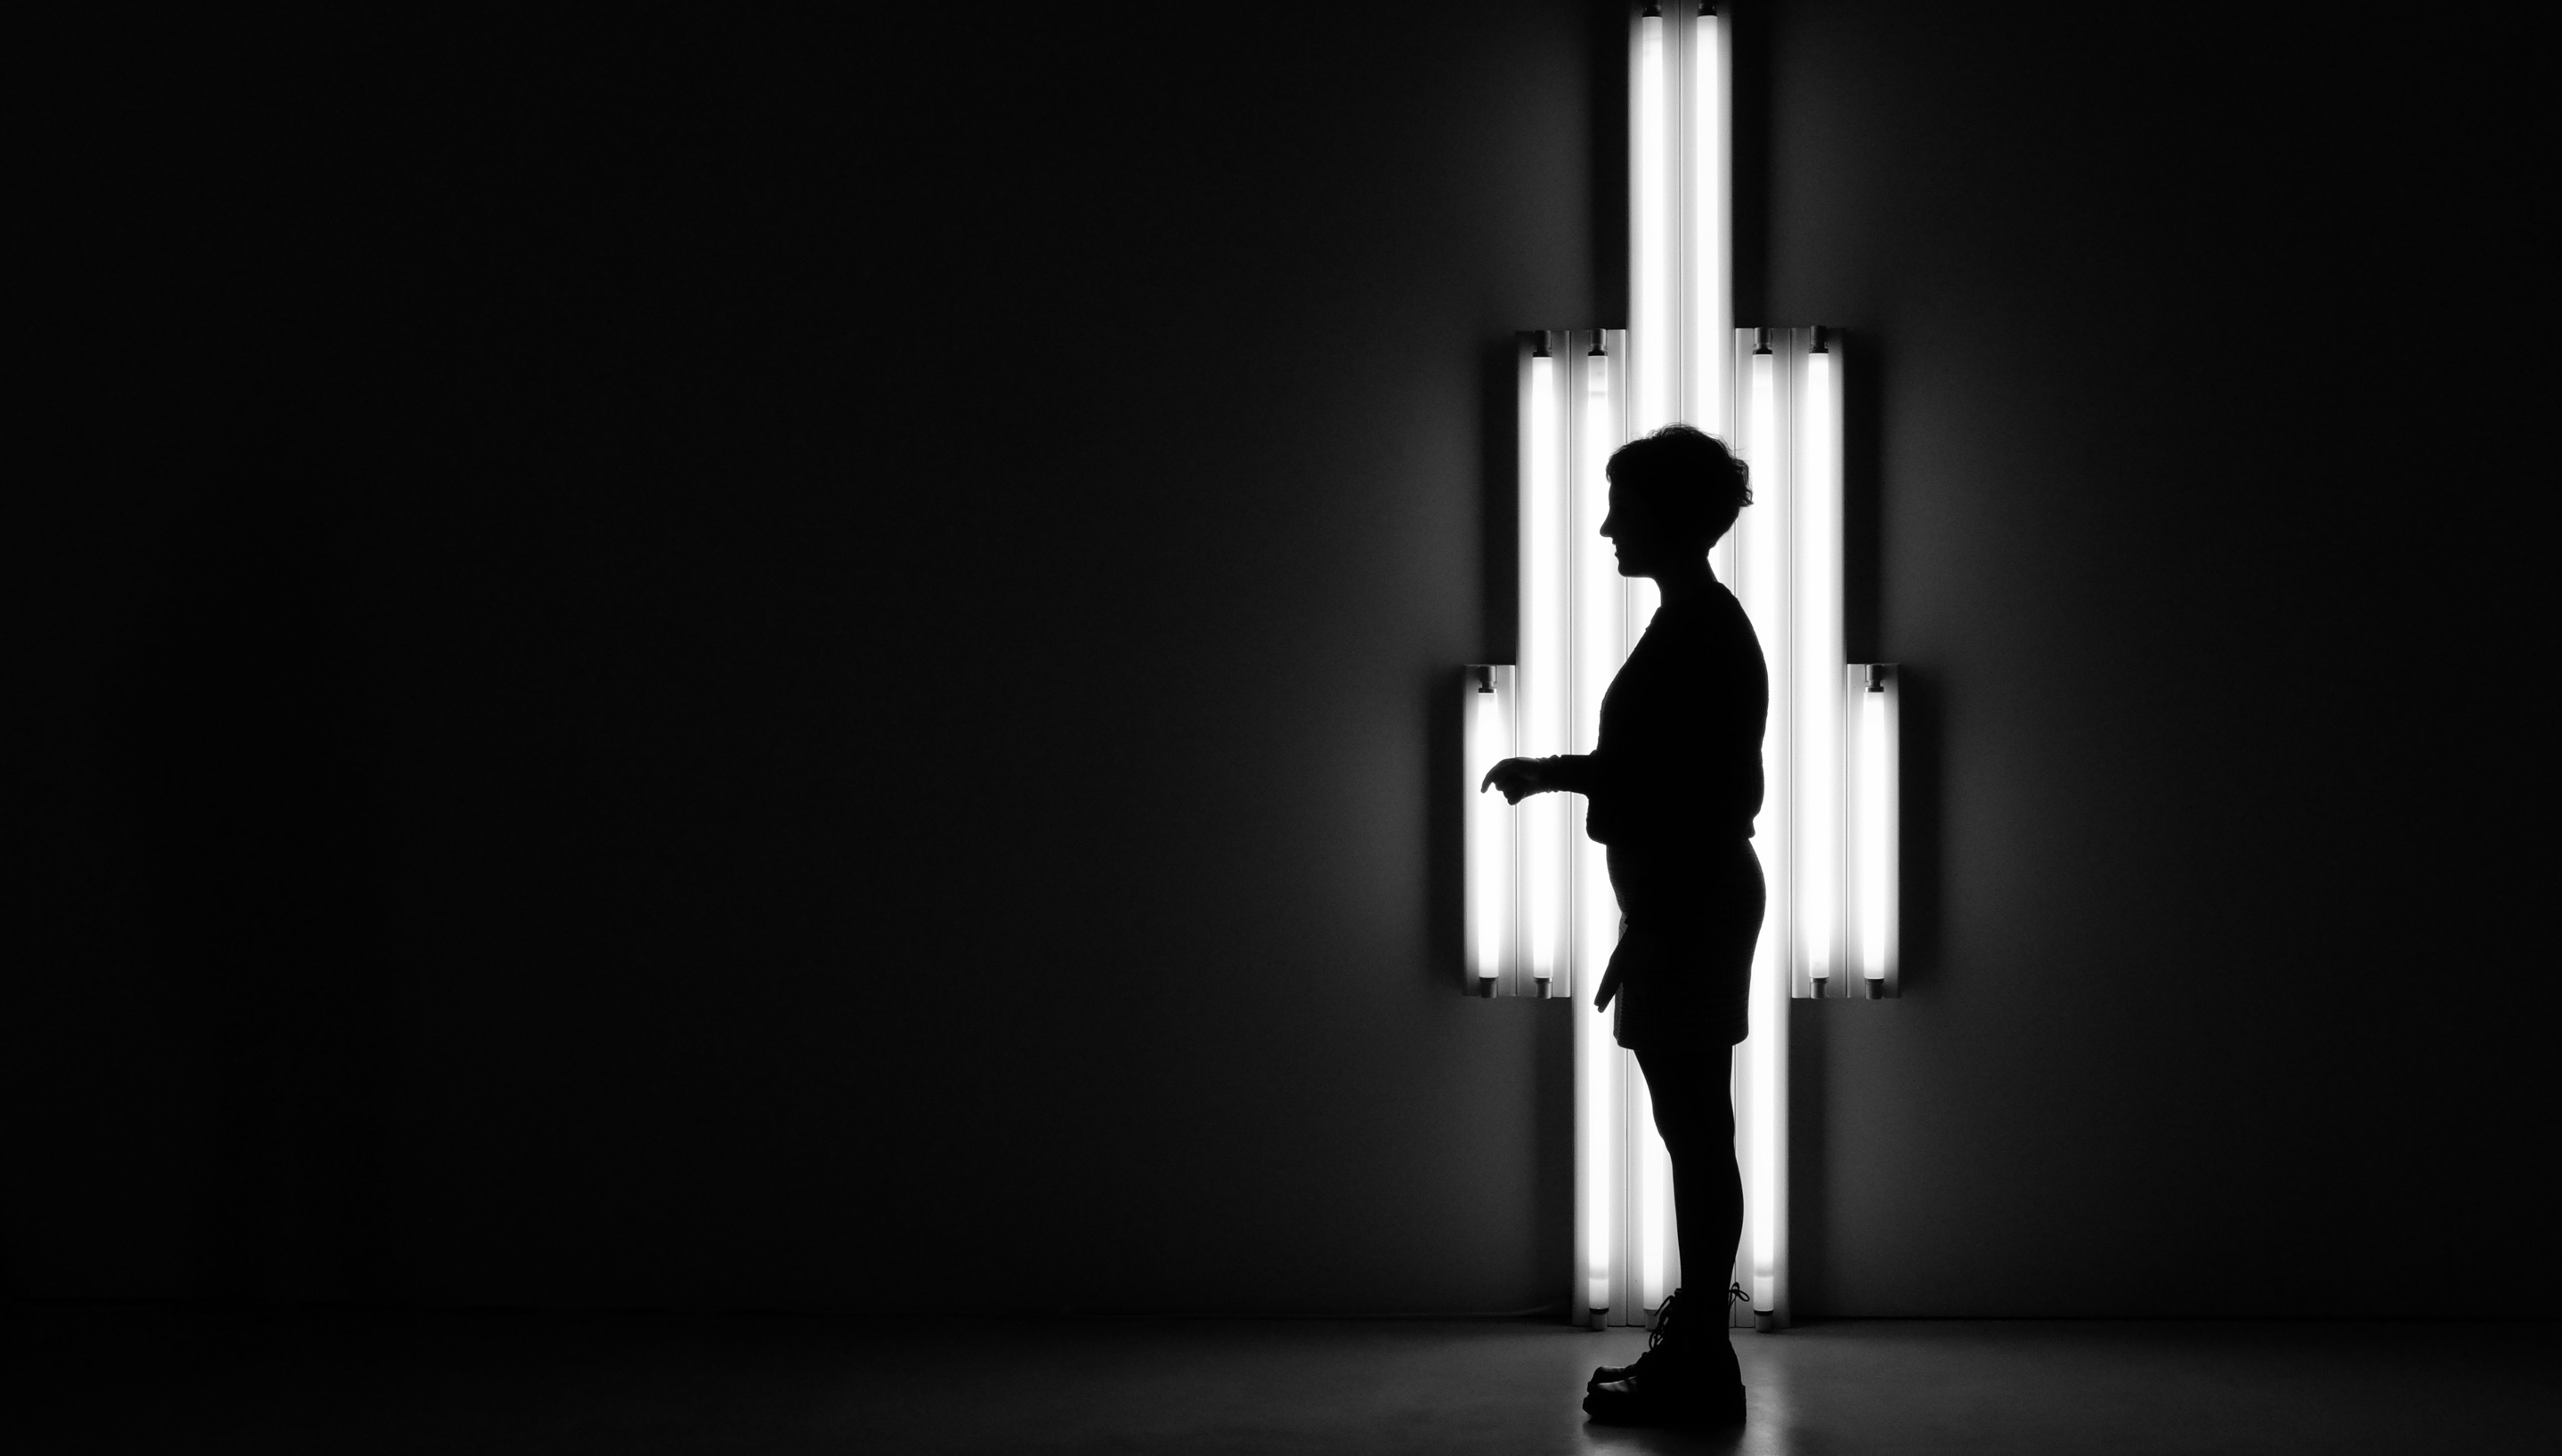 Silhouette of a woman to symbolize privacy